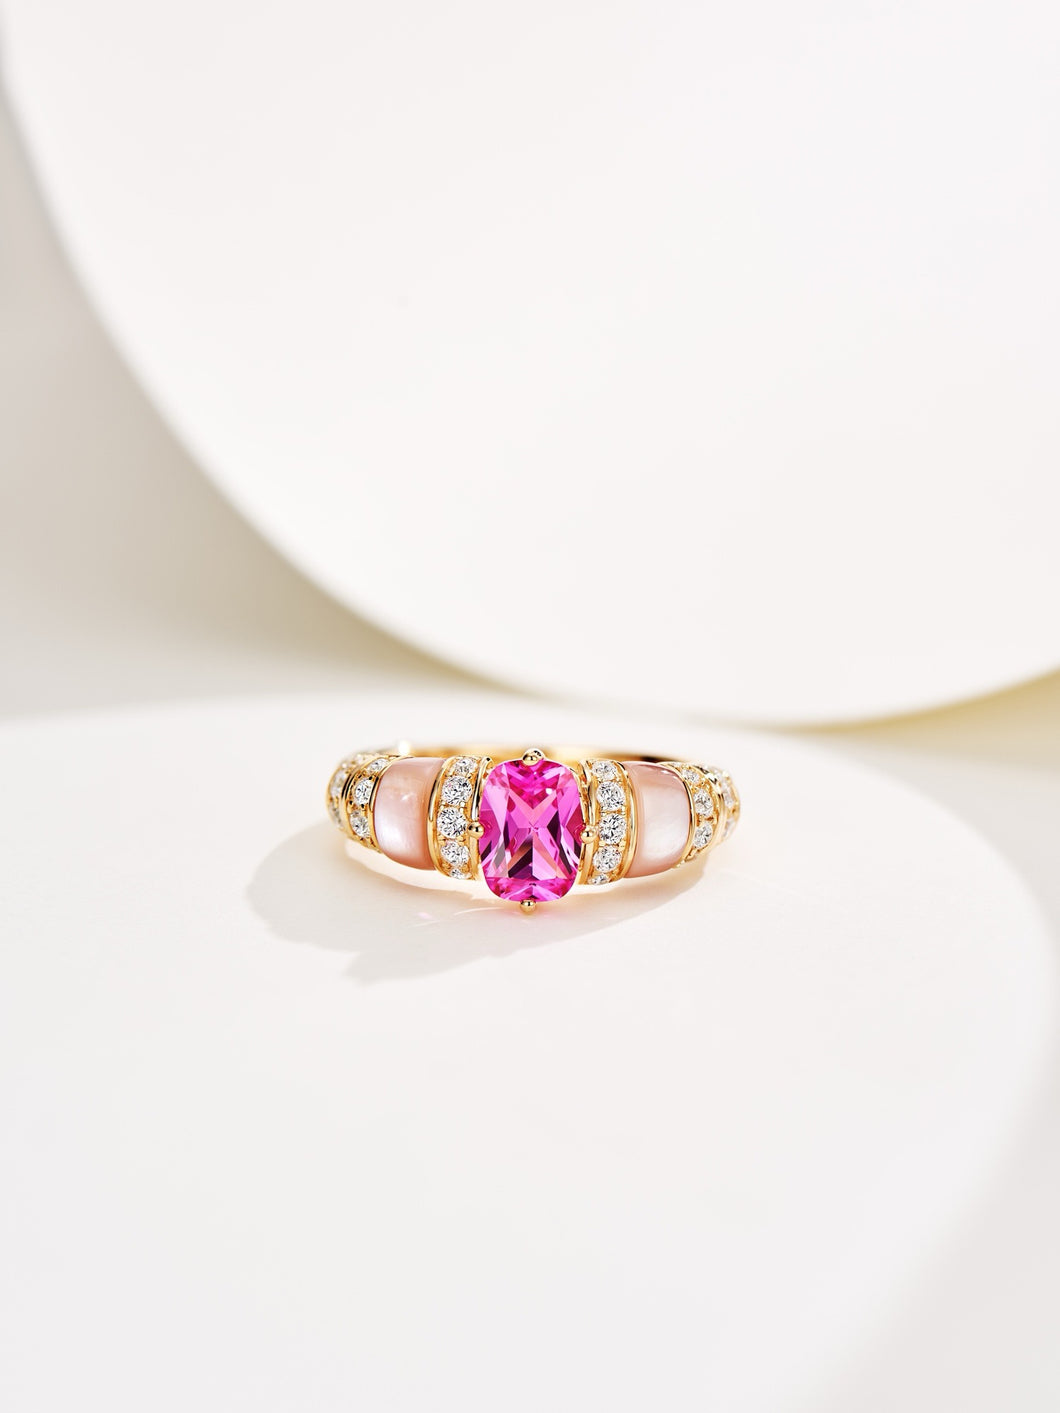 Blush Brilliance: Lab-Created Pink Diamond with Mother-of-Pearl Inlay in Gold-Plated Silver Ring